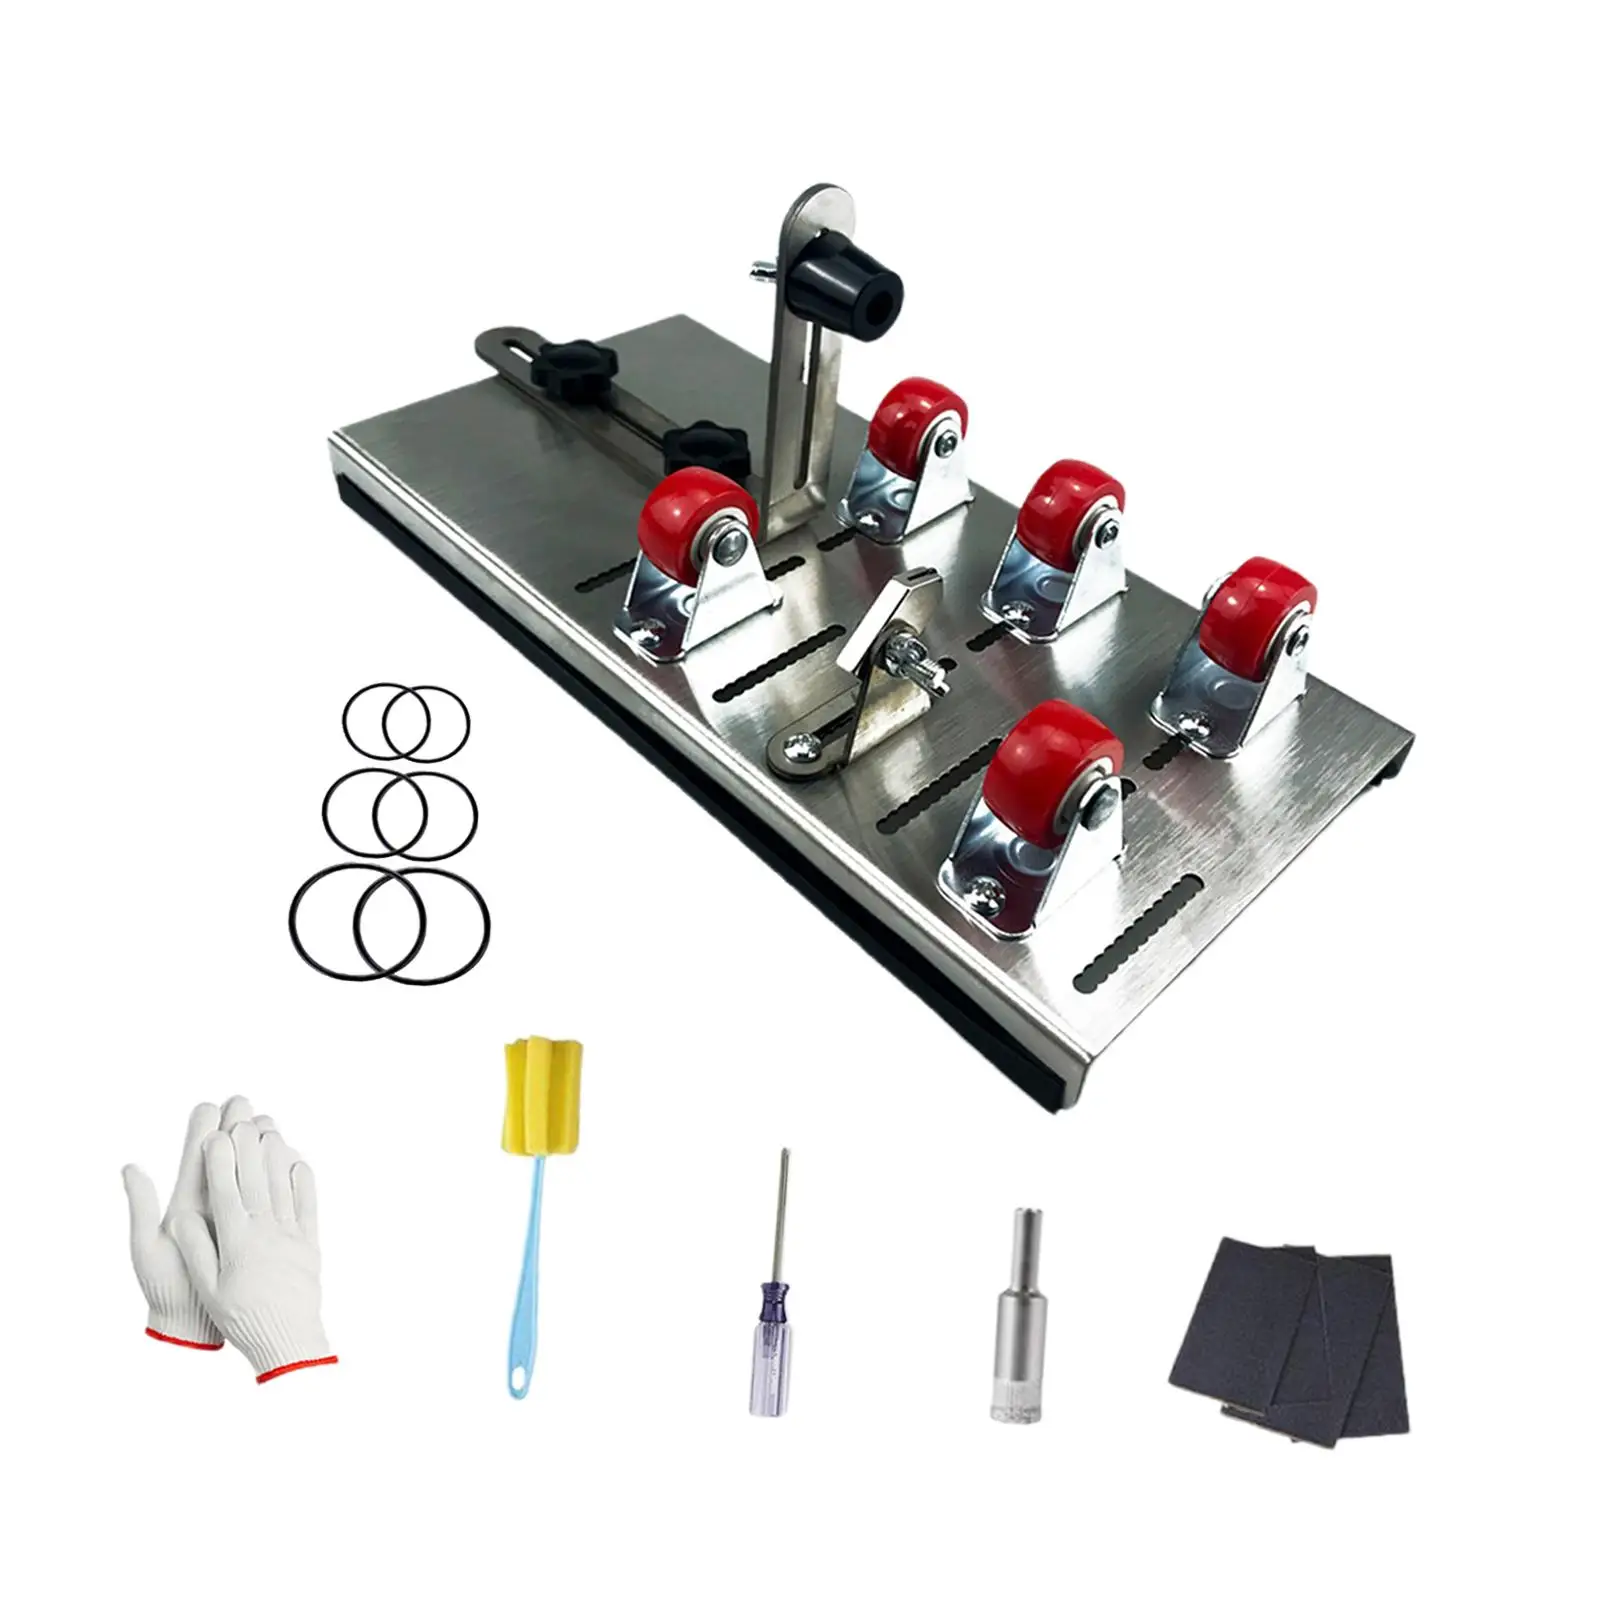 Glass Bottle Cutter Set Durable Stainless Steel Making Candlesticks Vases for Cutting Wine Round Bottles Liquor Champagne Beer